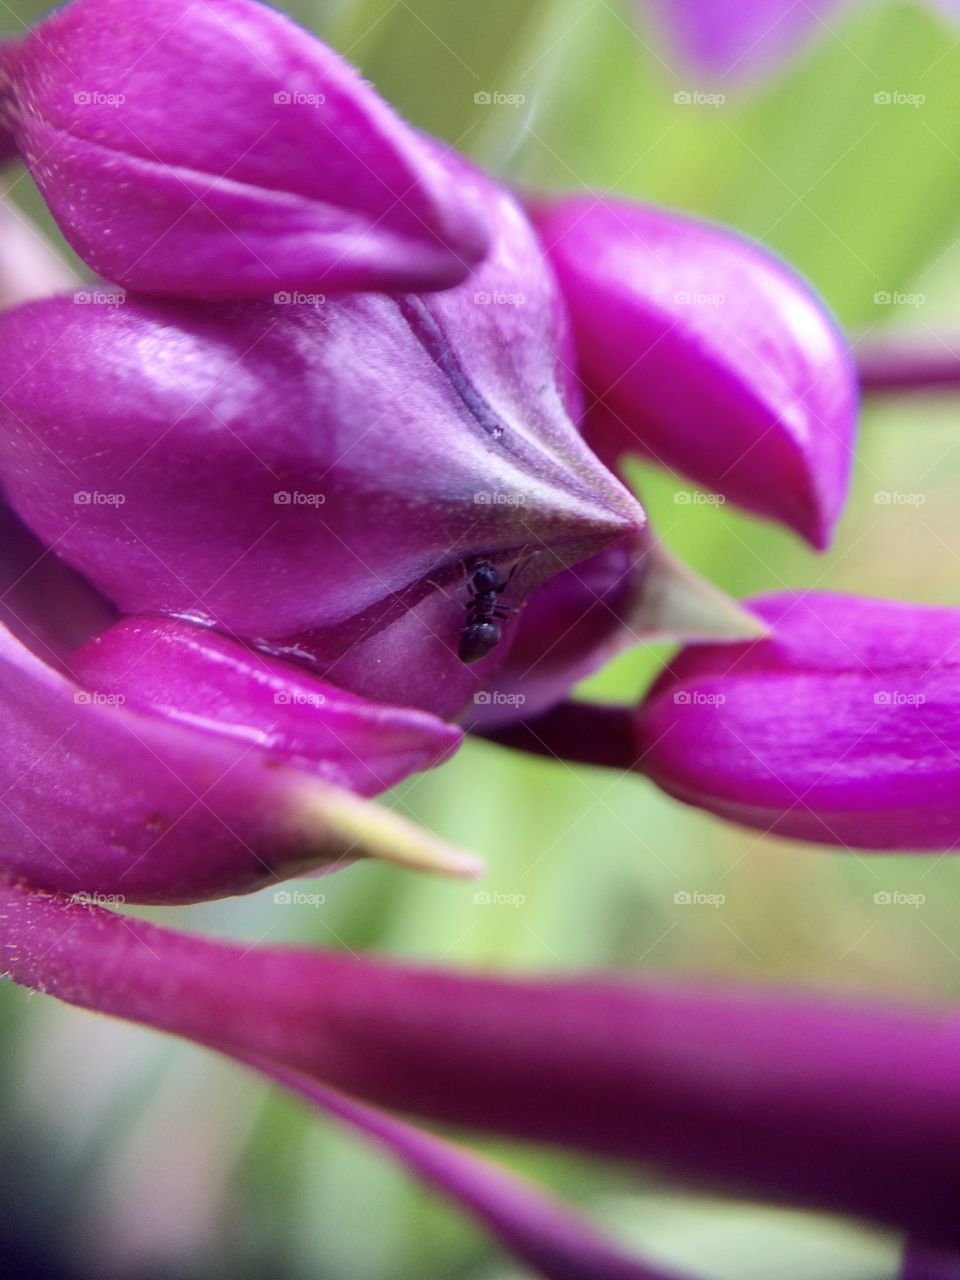 Ant on a bloom orchid flower